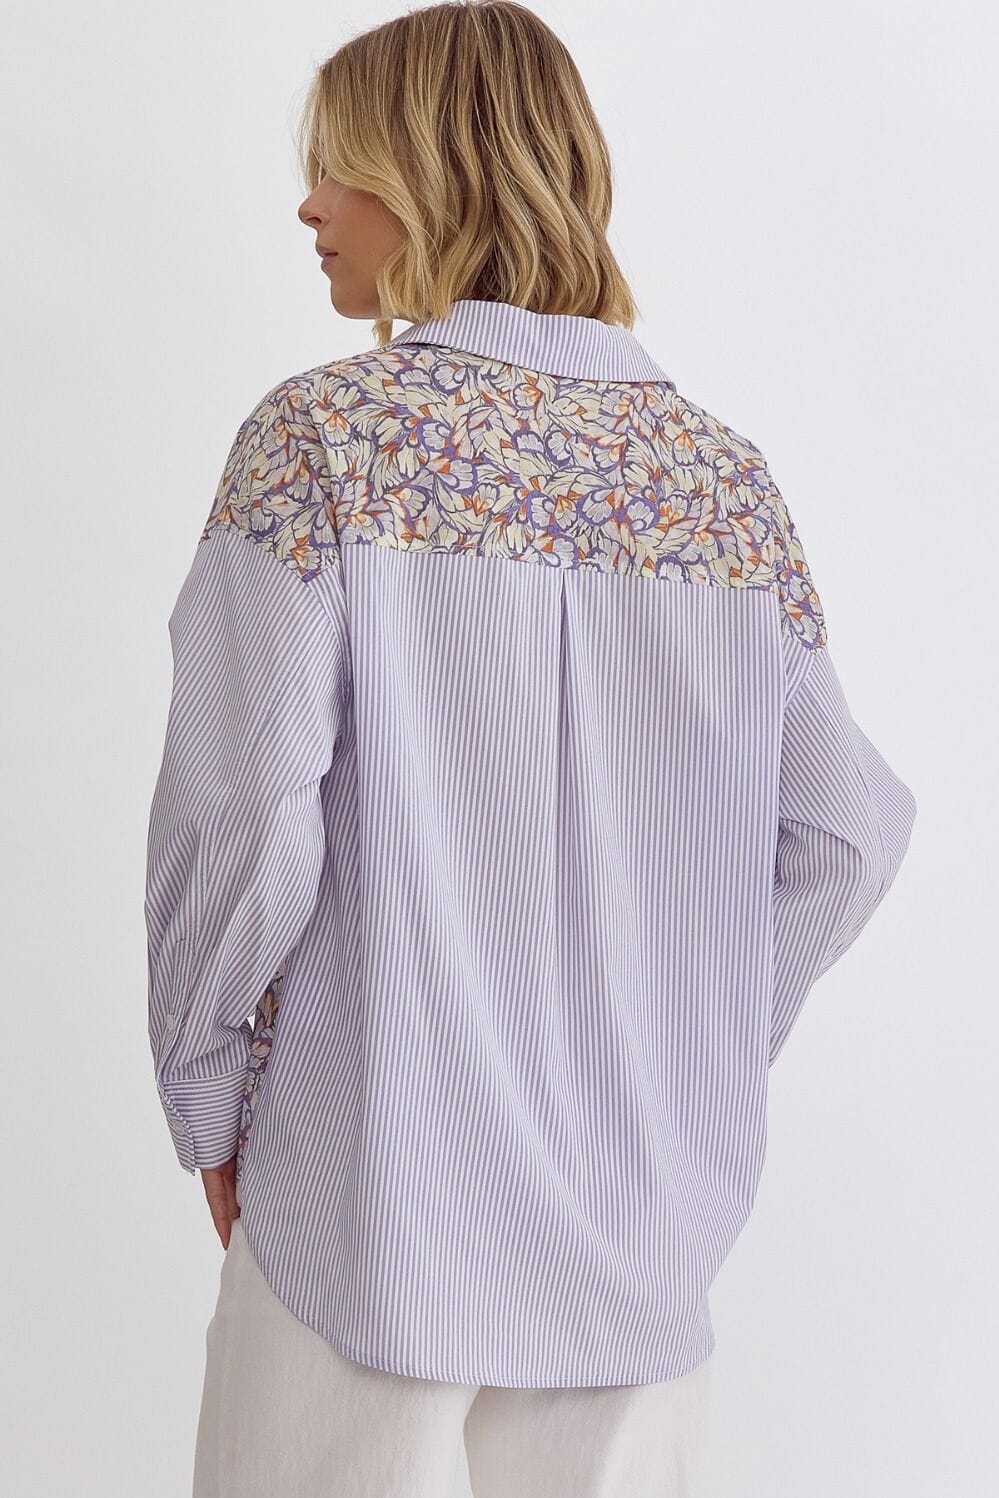 By the Way Lavender Floral Mix Top - Caroline Hill